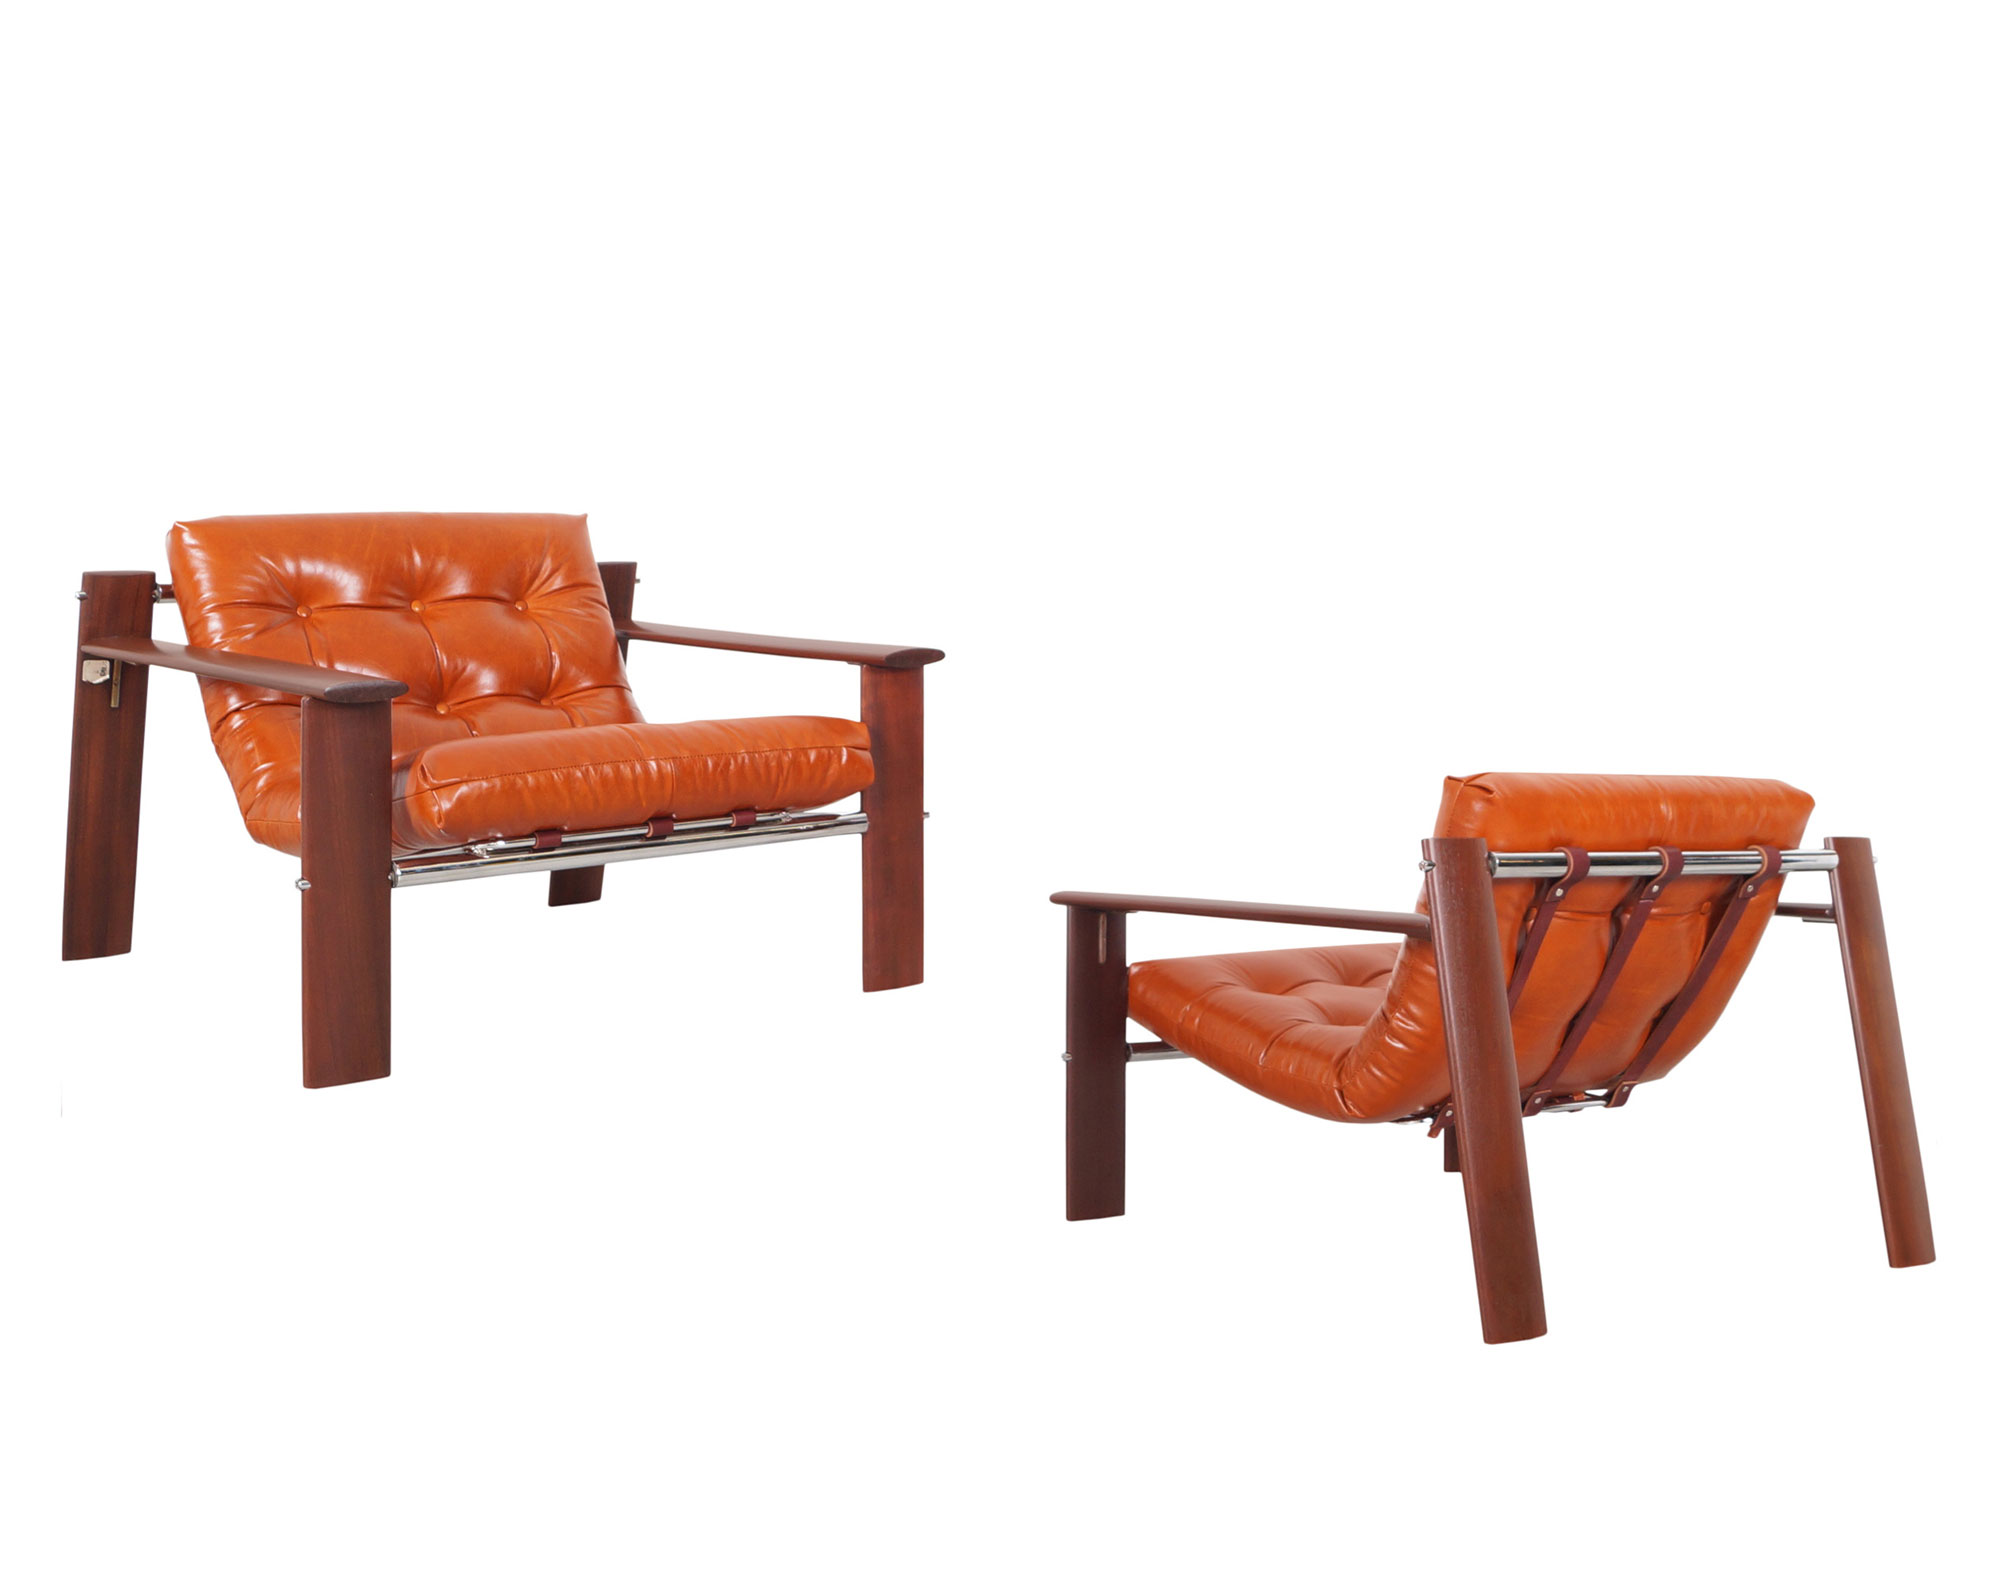 Brazilian MP-129 Jacaranda and Leather Lounge Chairs by Percival Lafer